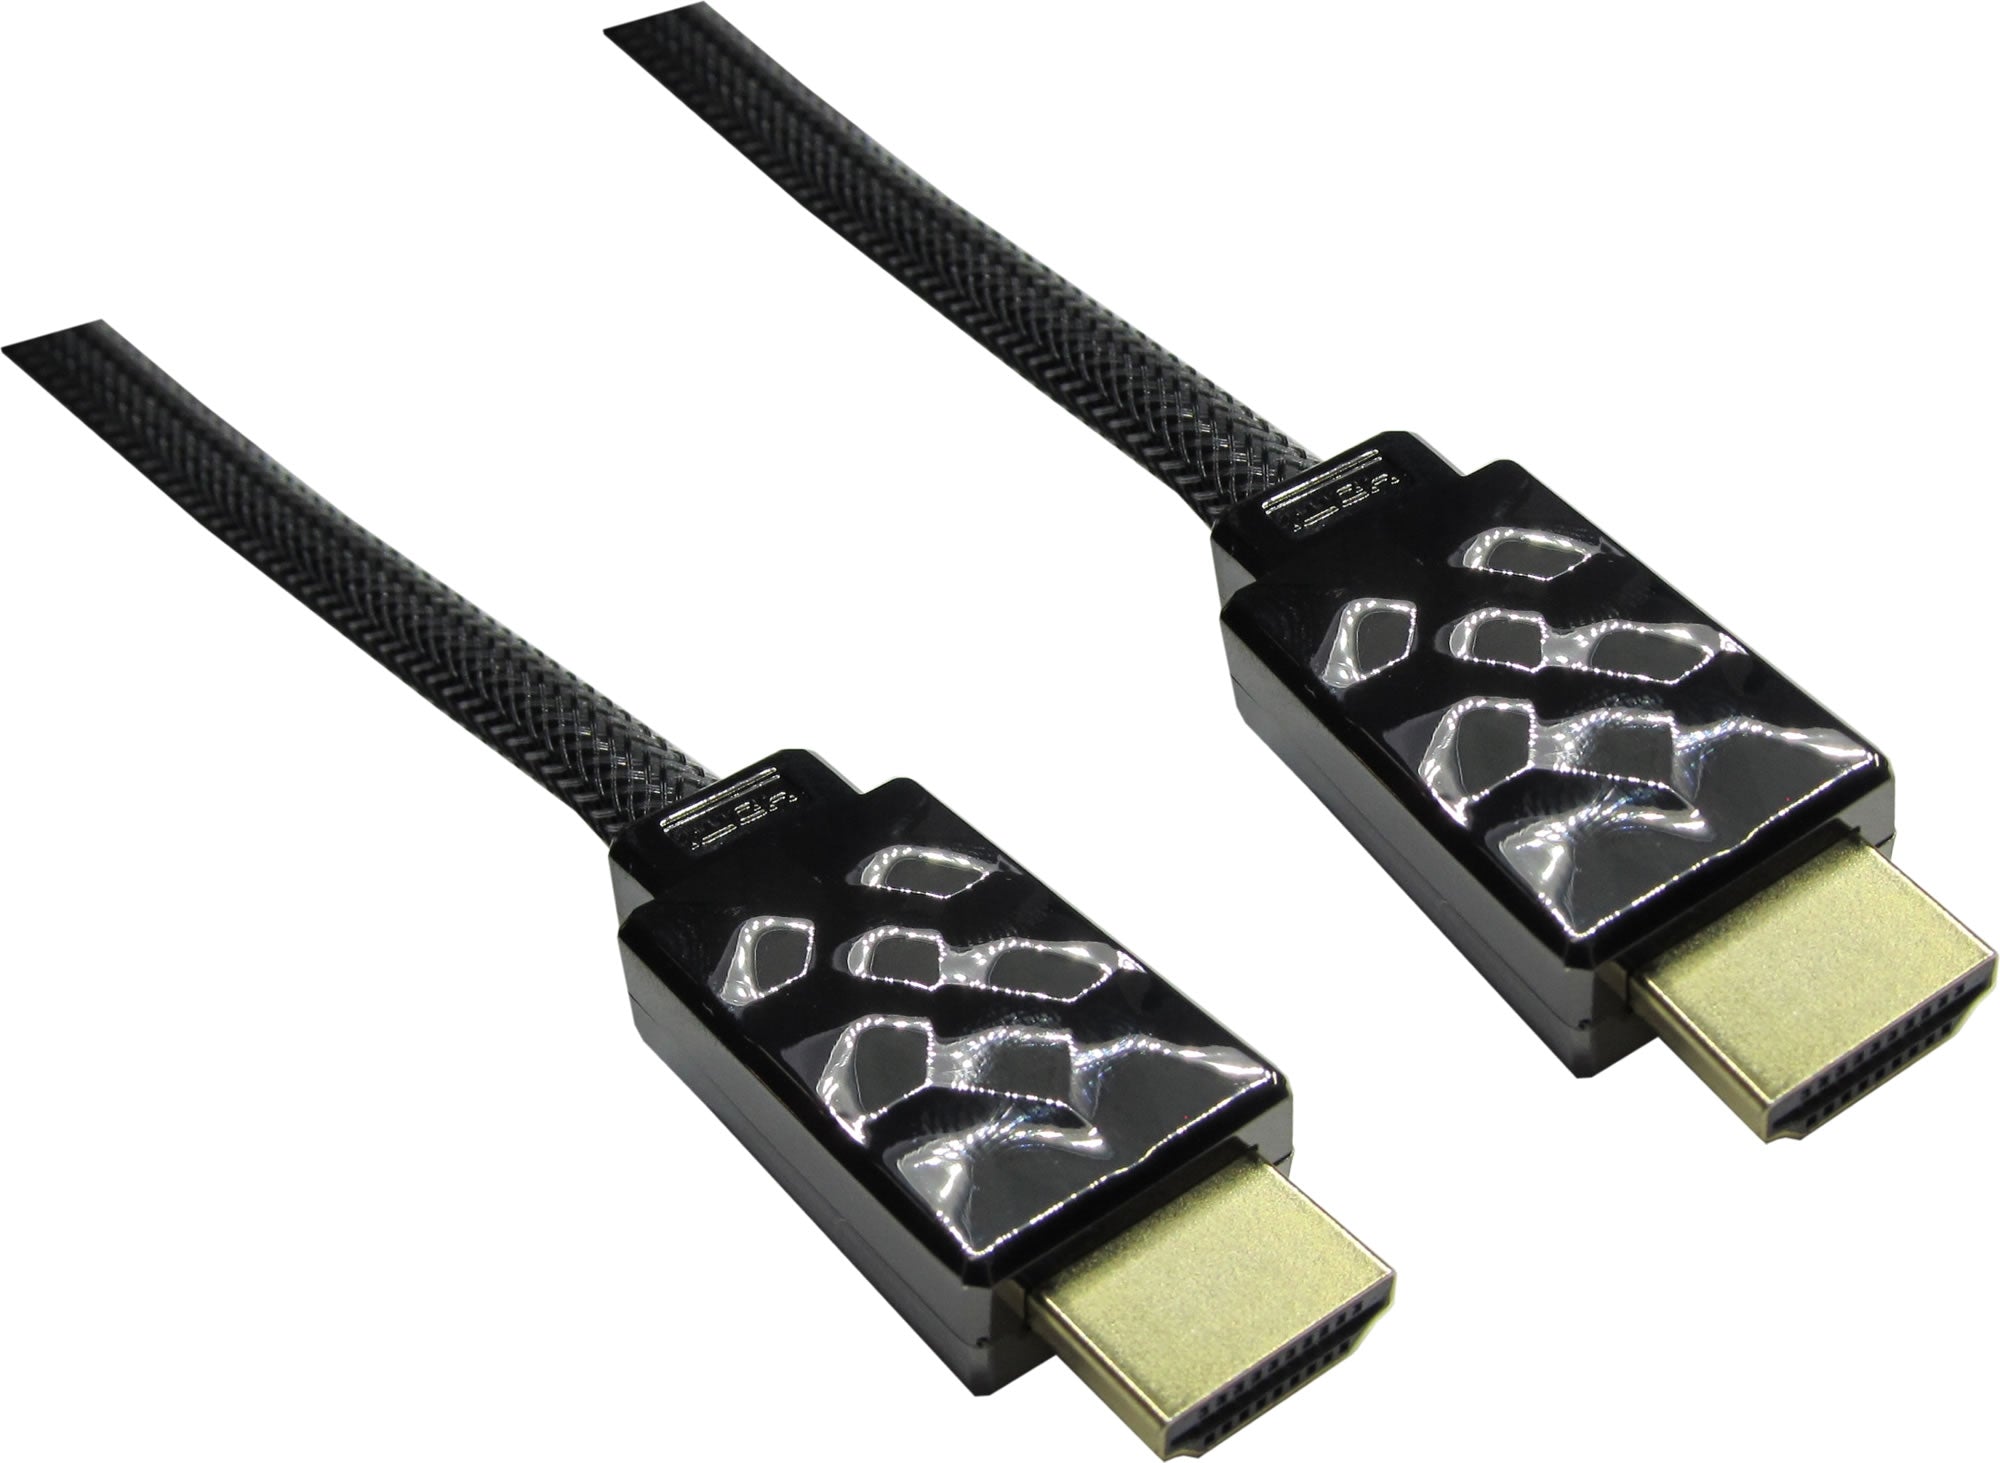 16-6321-25 HDMI High Speed Cable 4K 3D HDMI Cable version 1.4 - 25 Ft